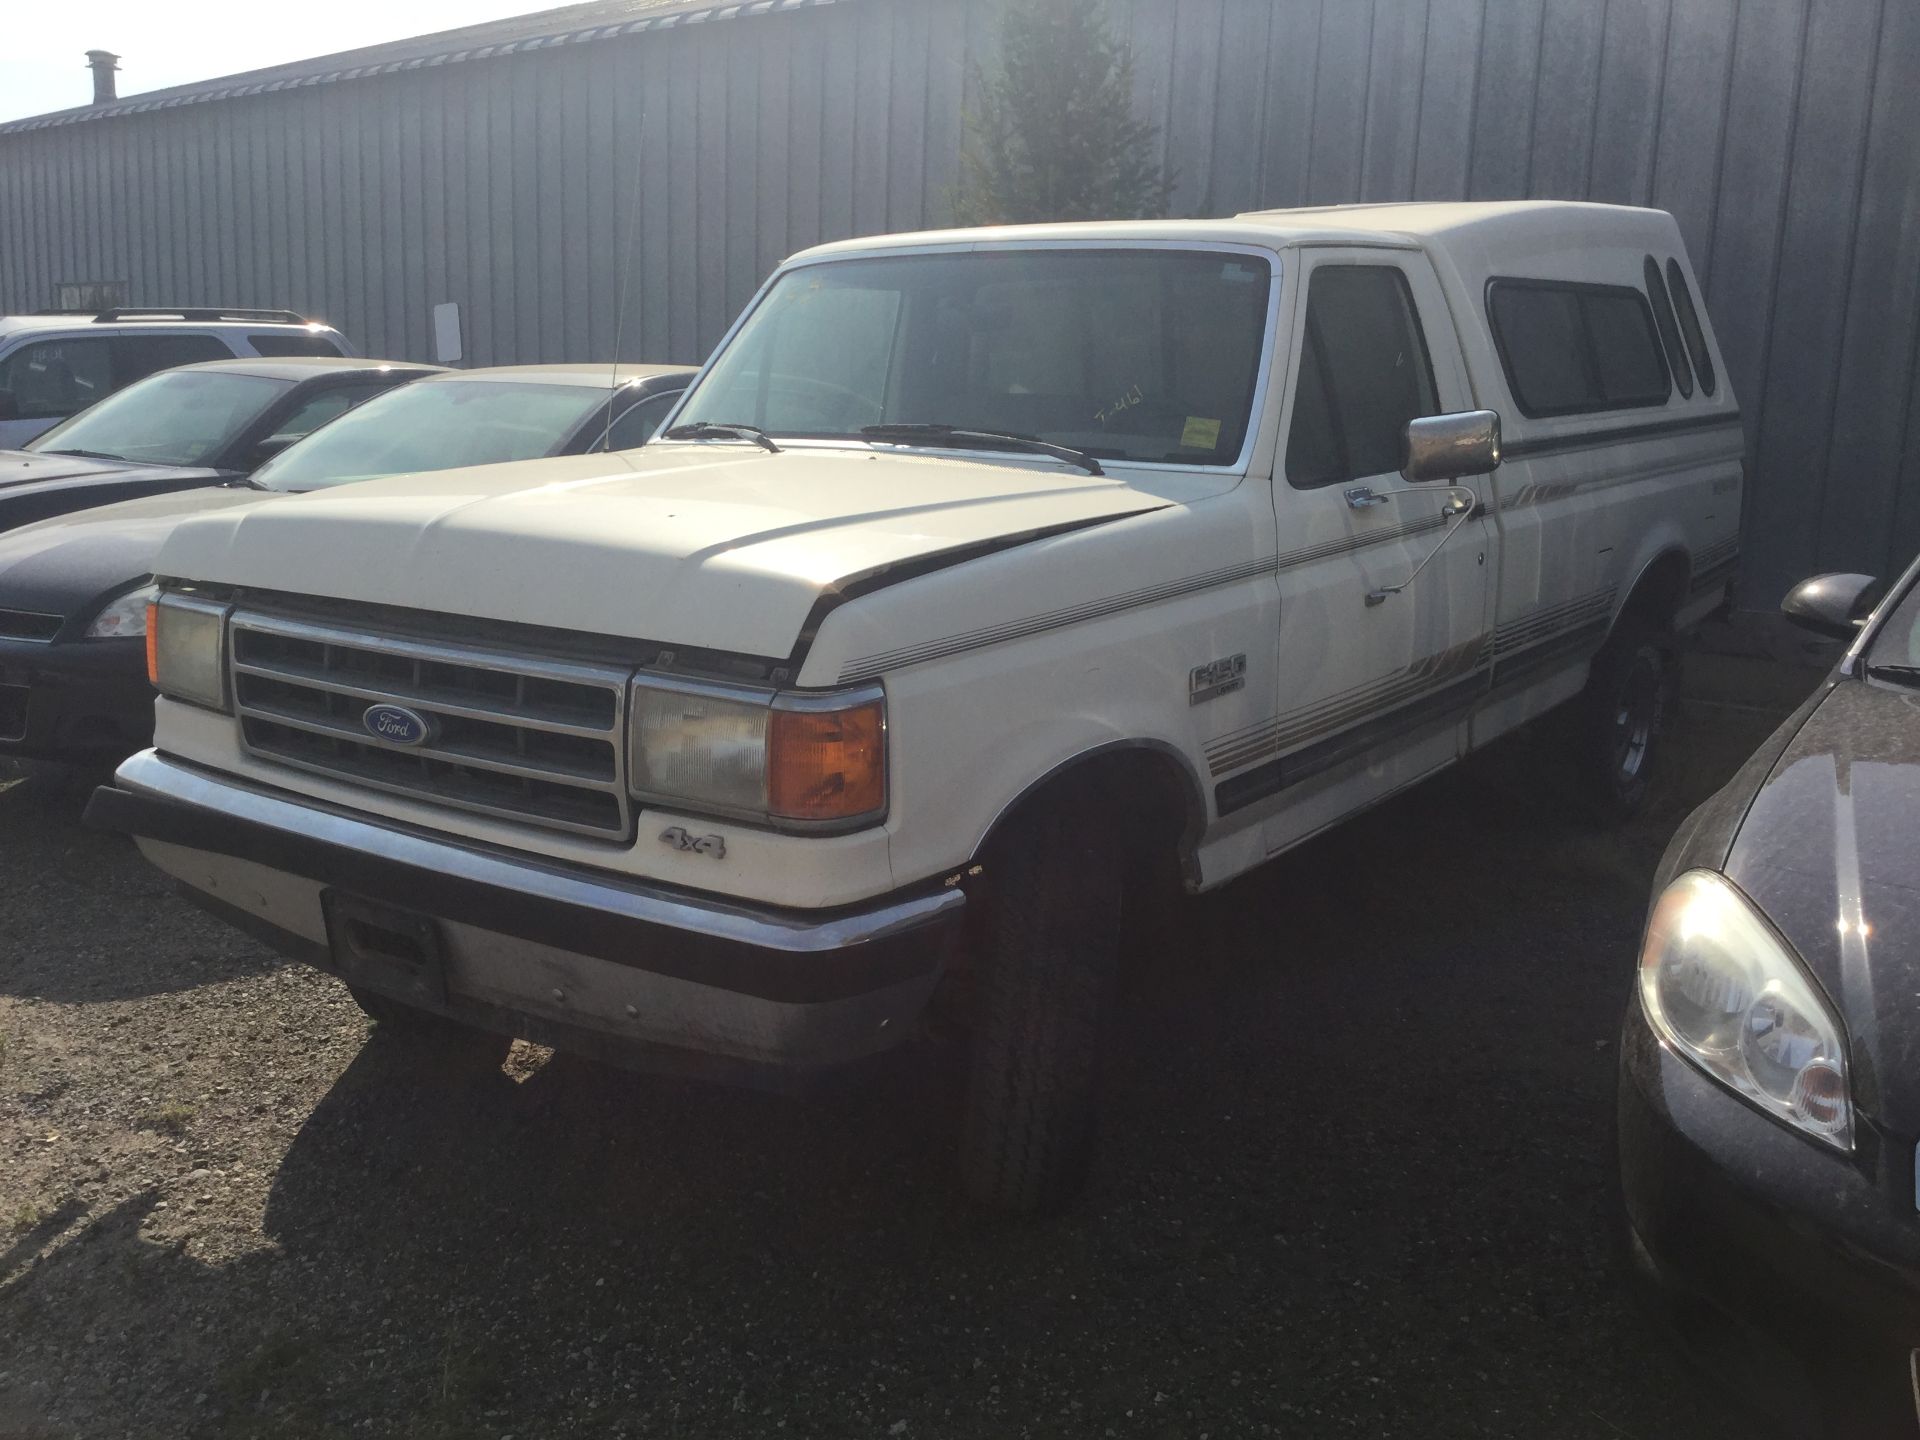 Year: 1989 Make: Ford Model: 1/2T Type: Pickup Vin#: A93975 Mileage/Hours: 20257 5.0L, 5sp, 4x4, RC,